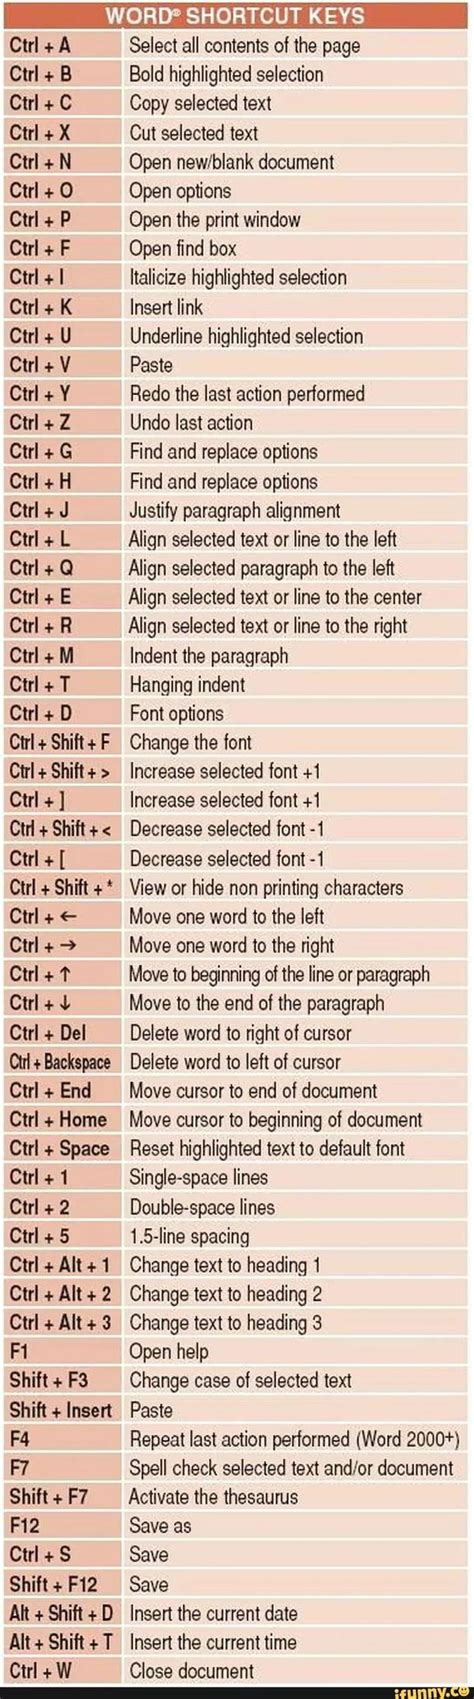 Keyboard Shortcuts Guide R Coolguides